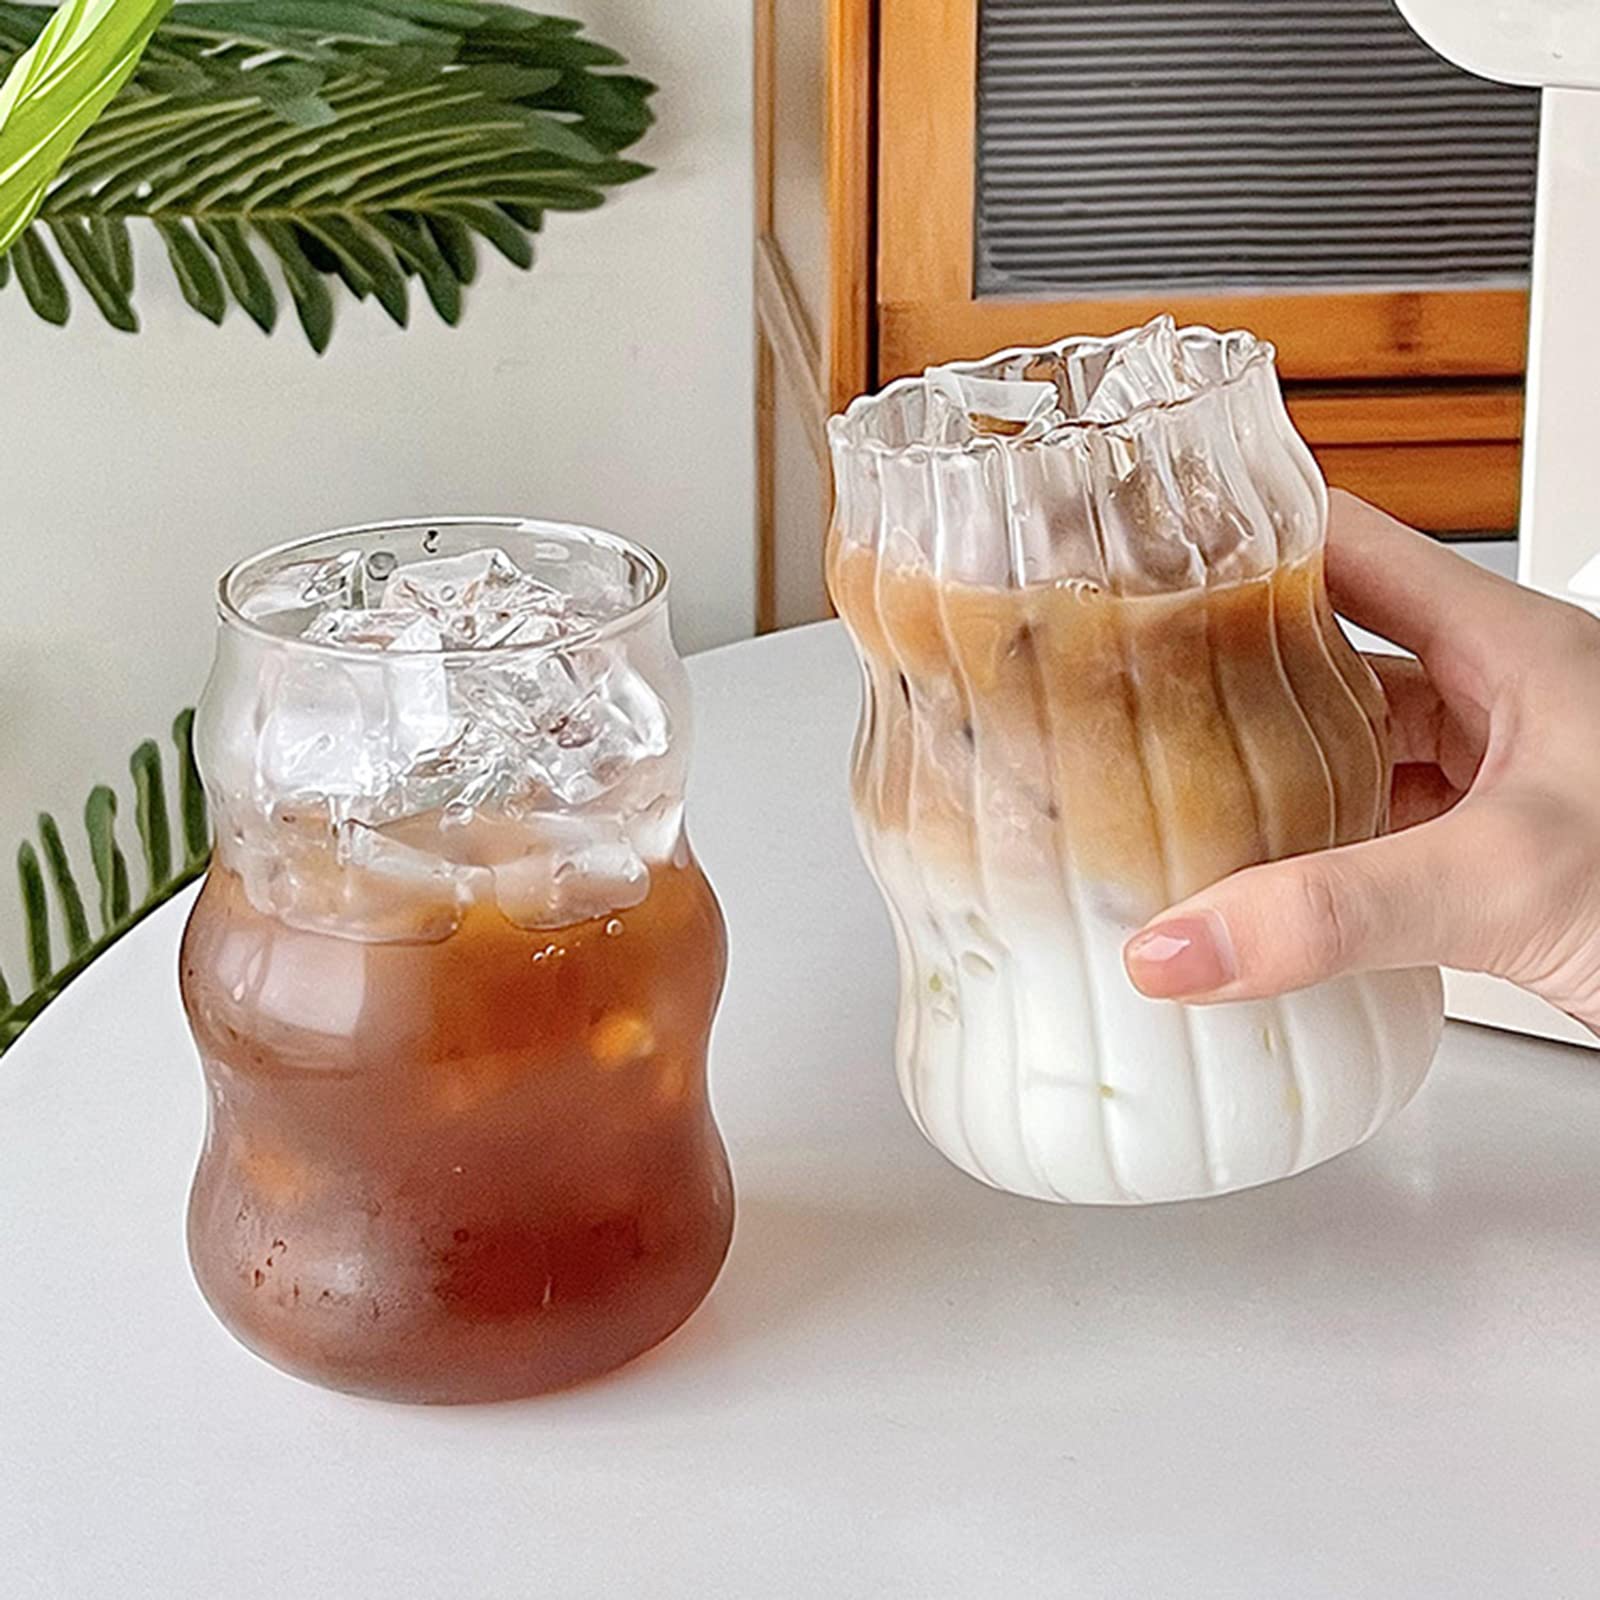 MALOKI Ripple Drinking Glasses,Origami Style Glass Cup Creative Ribbed Glassware Iced Coffee Cups Ideal for Cocktail, Whiskey, Fruit Juice,Milk,Water, Kitchen Bar Decor